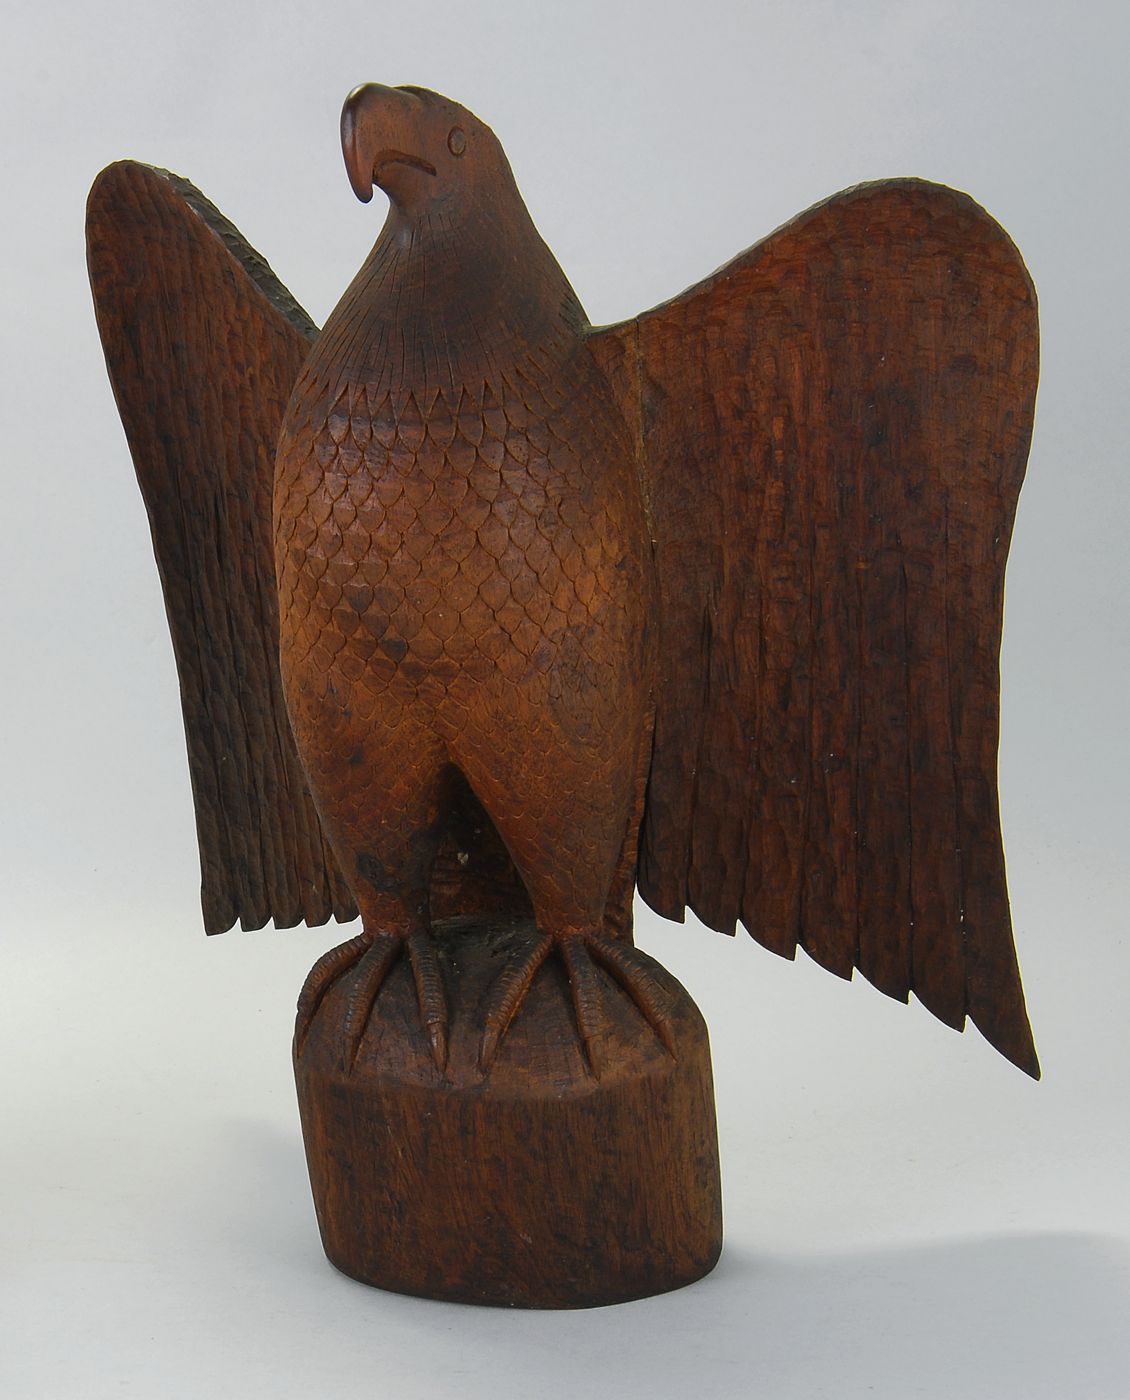 CARVED WOODEN EAGLE19th CenturyWith